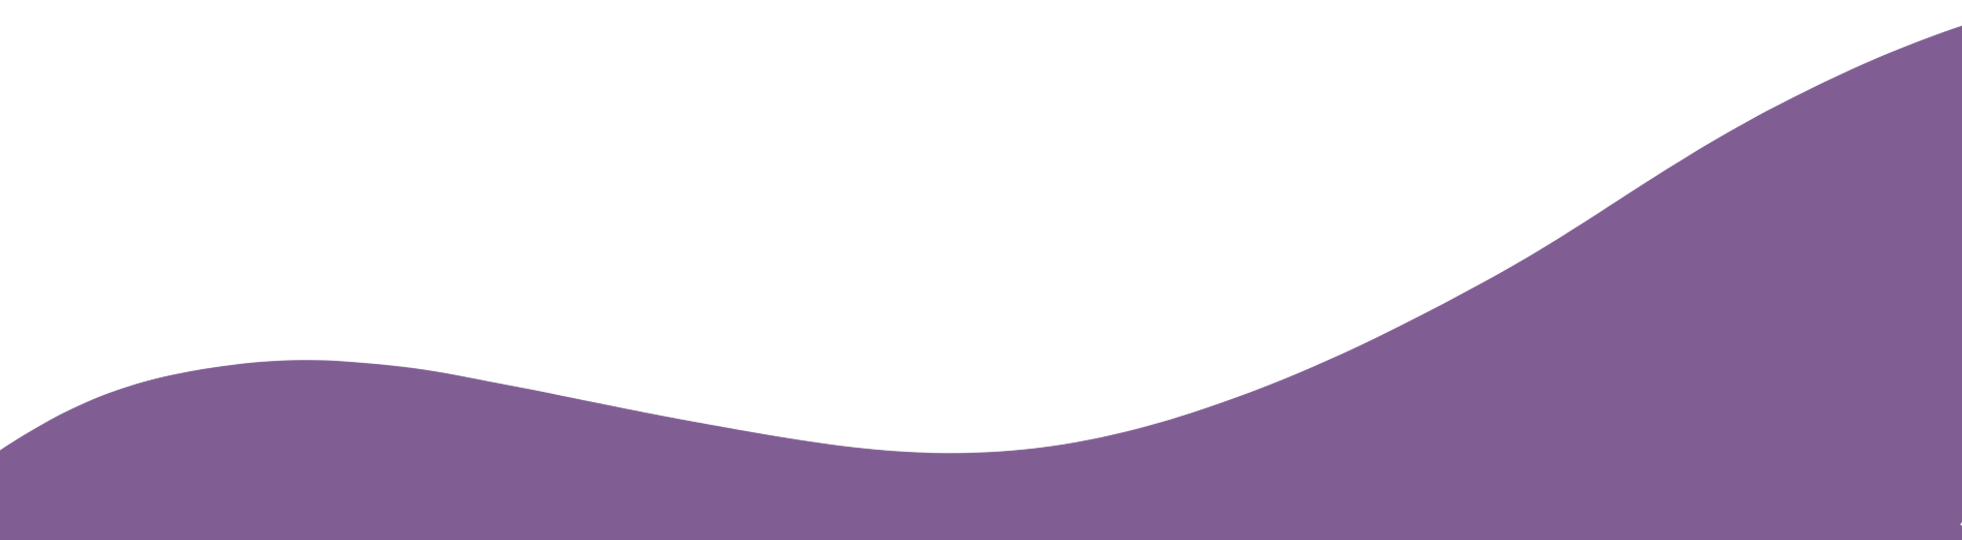 Forward-facing purple rectangle with a squiggly top